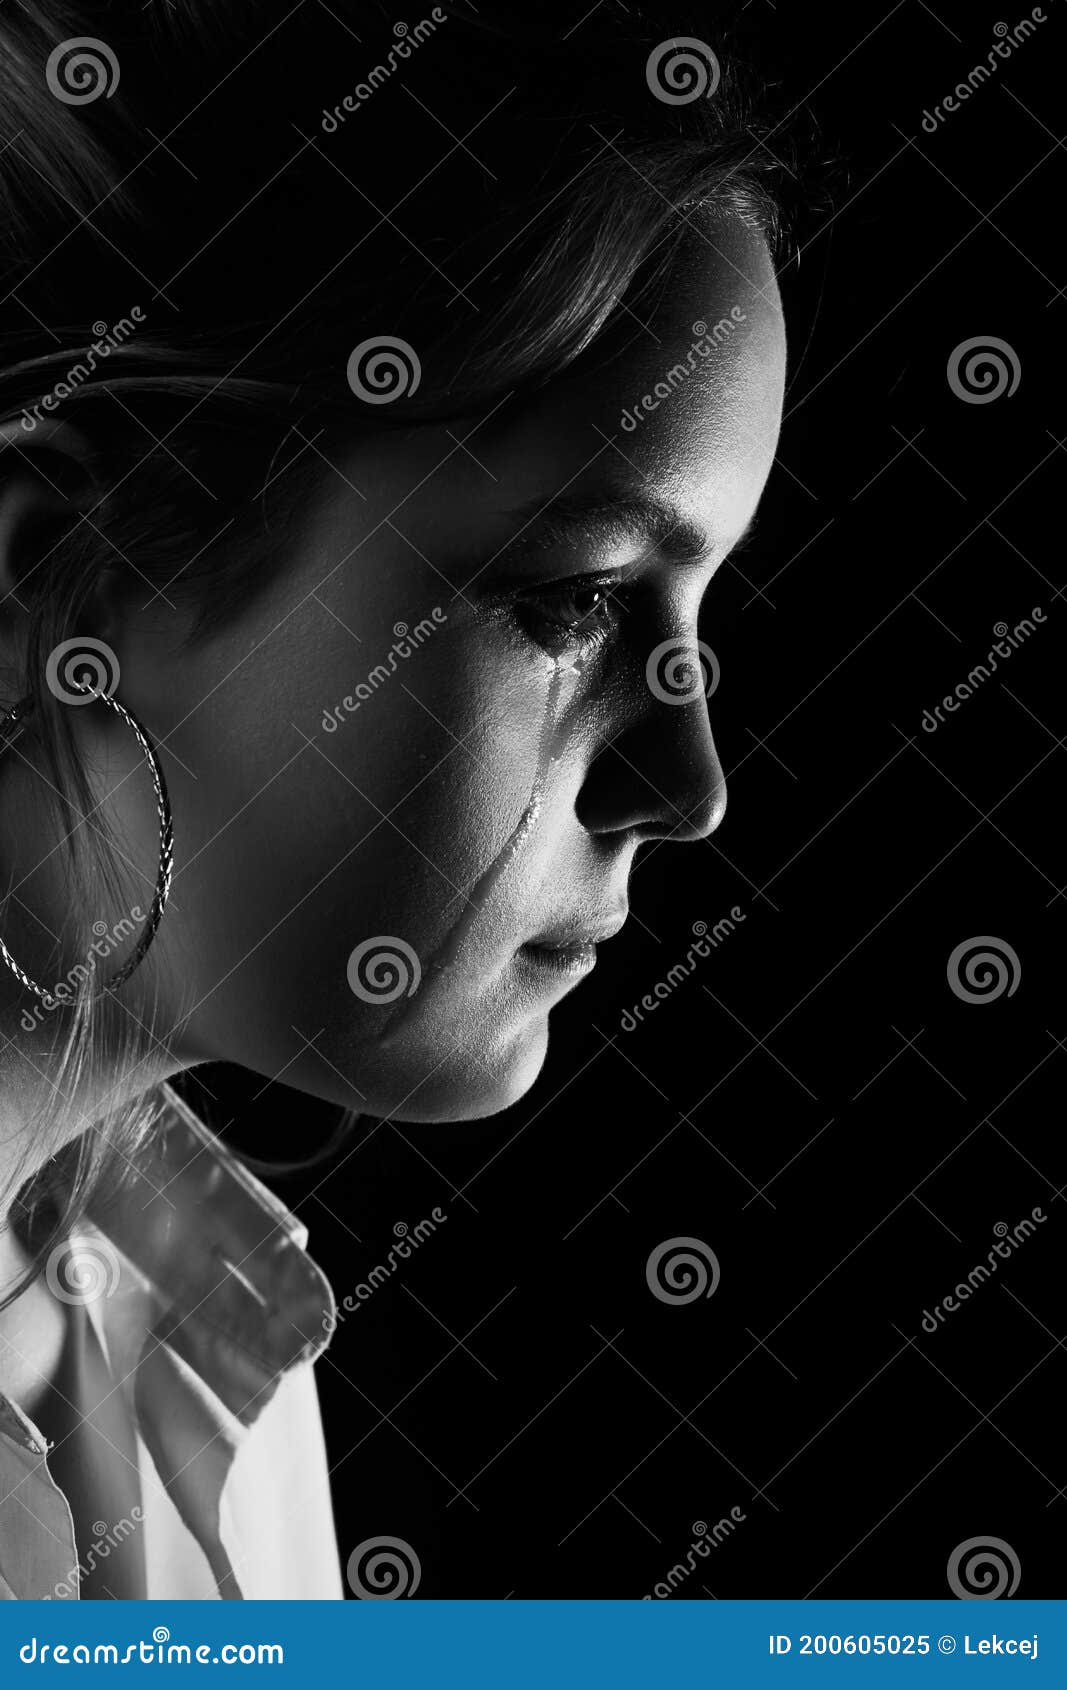 Sad crying girl stock image. Image of grief, expression - 200605025